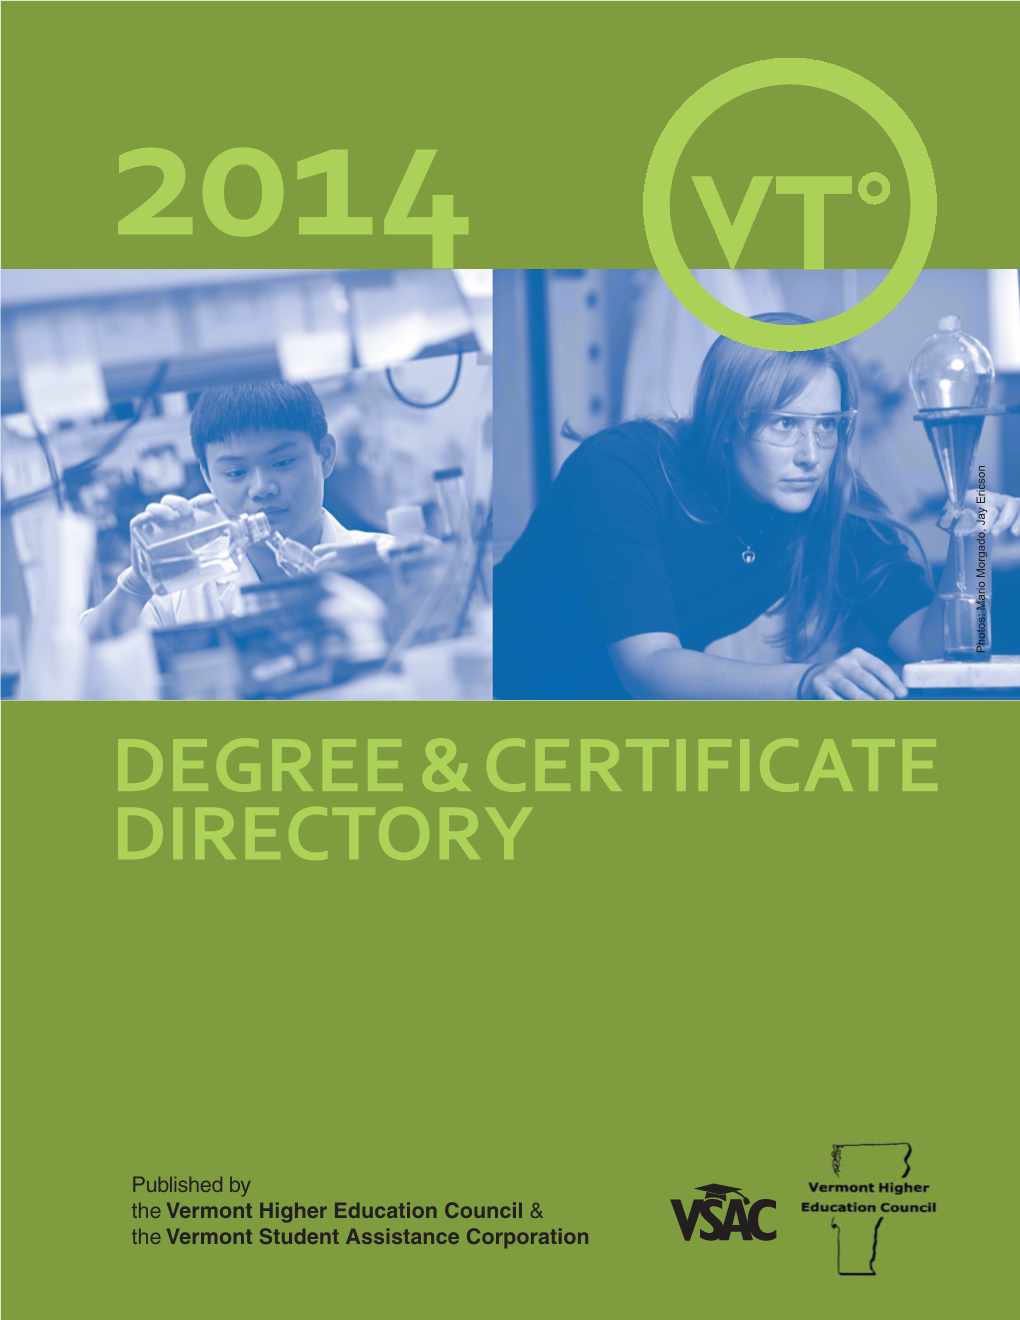 2014 Degree and Certificate Directory Is a Joint Project of the Vermont Higher Education Council and the Vermont Student Assistance Corporation